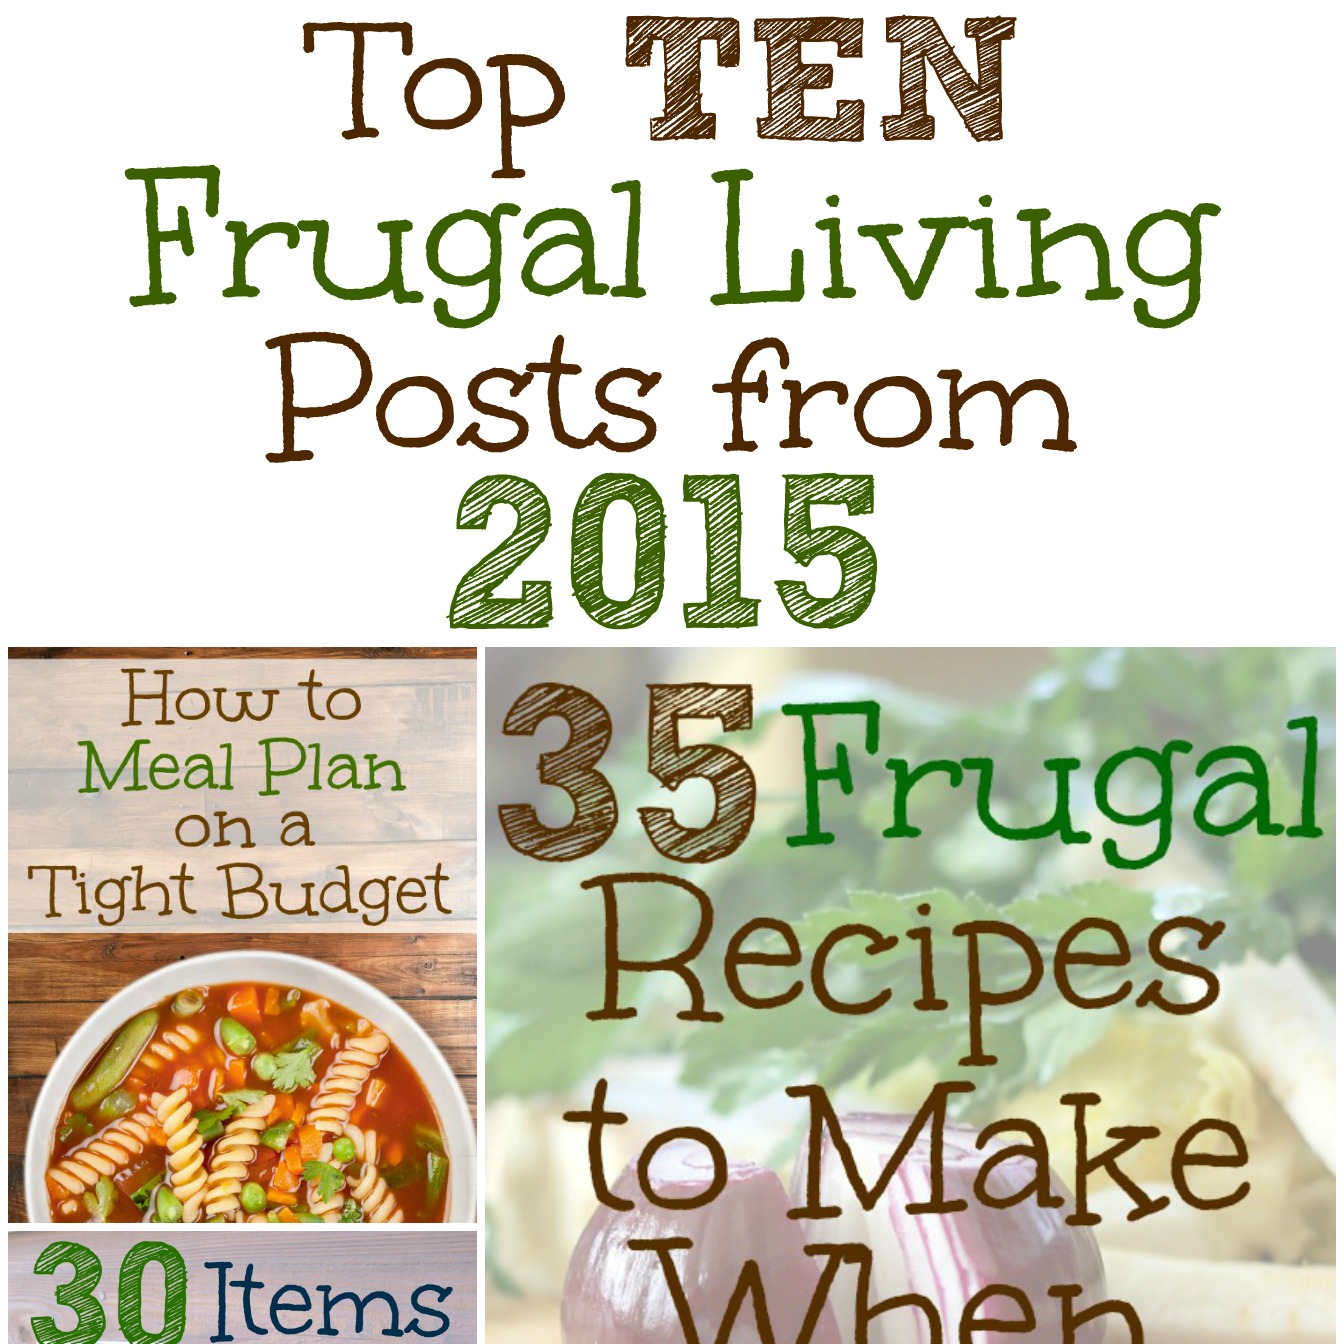 Top 10 Frugal Living Posts from 2015